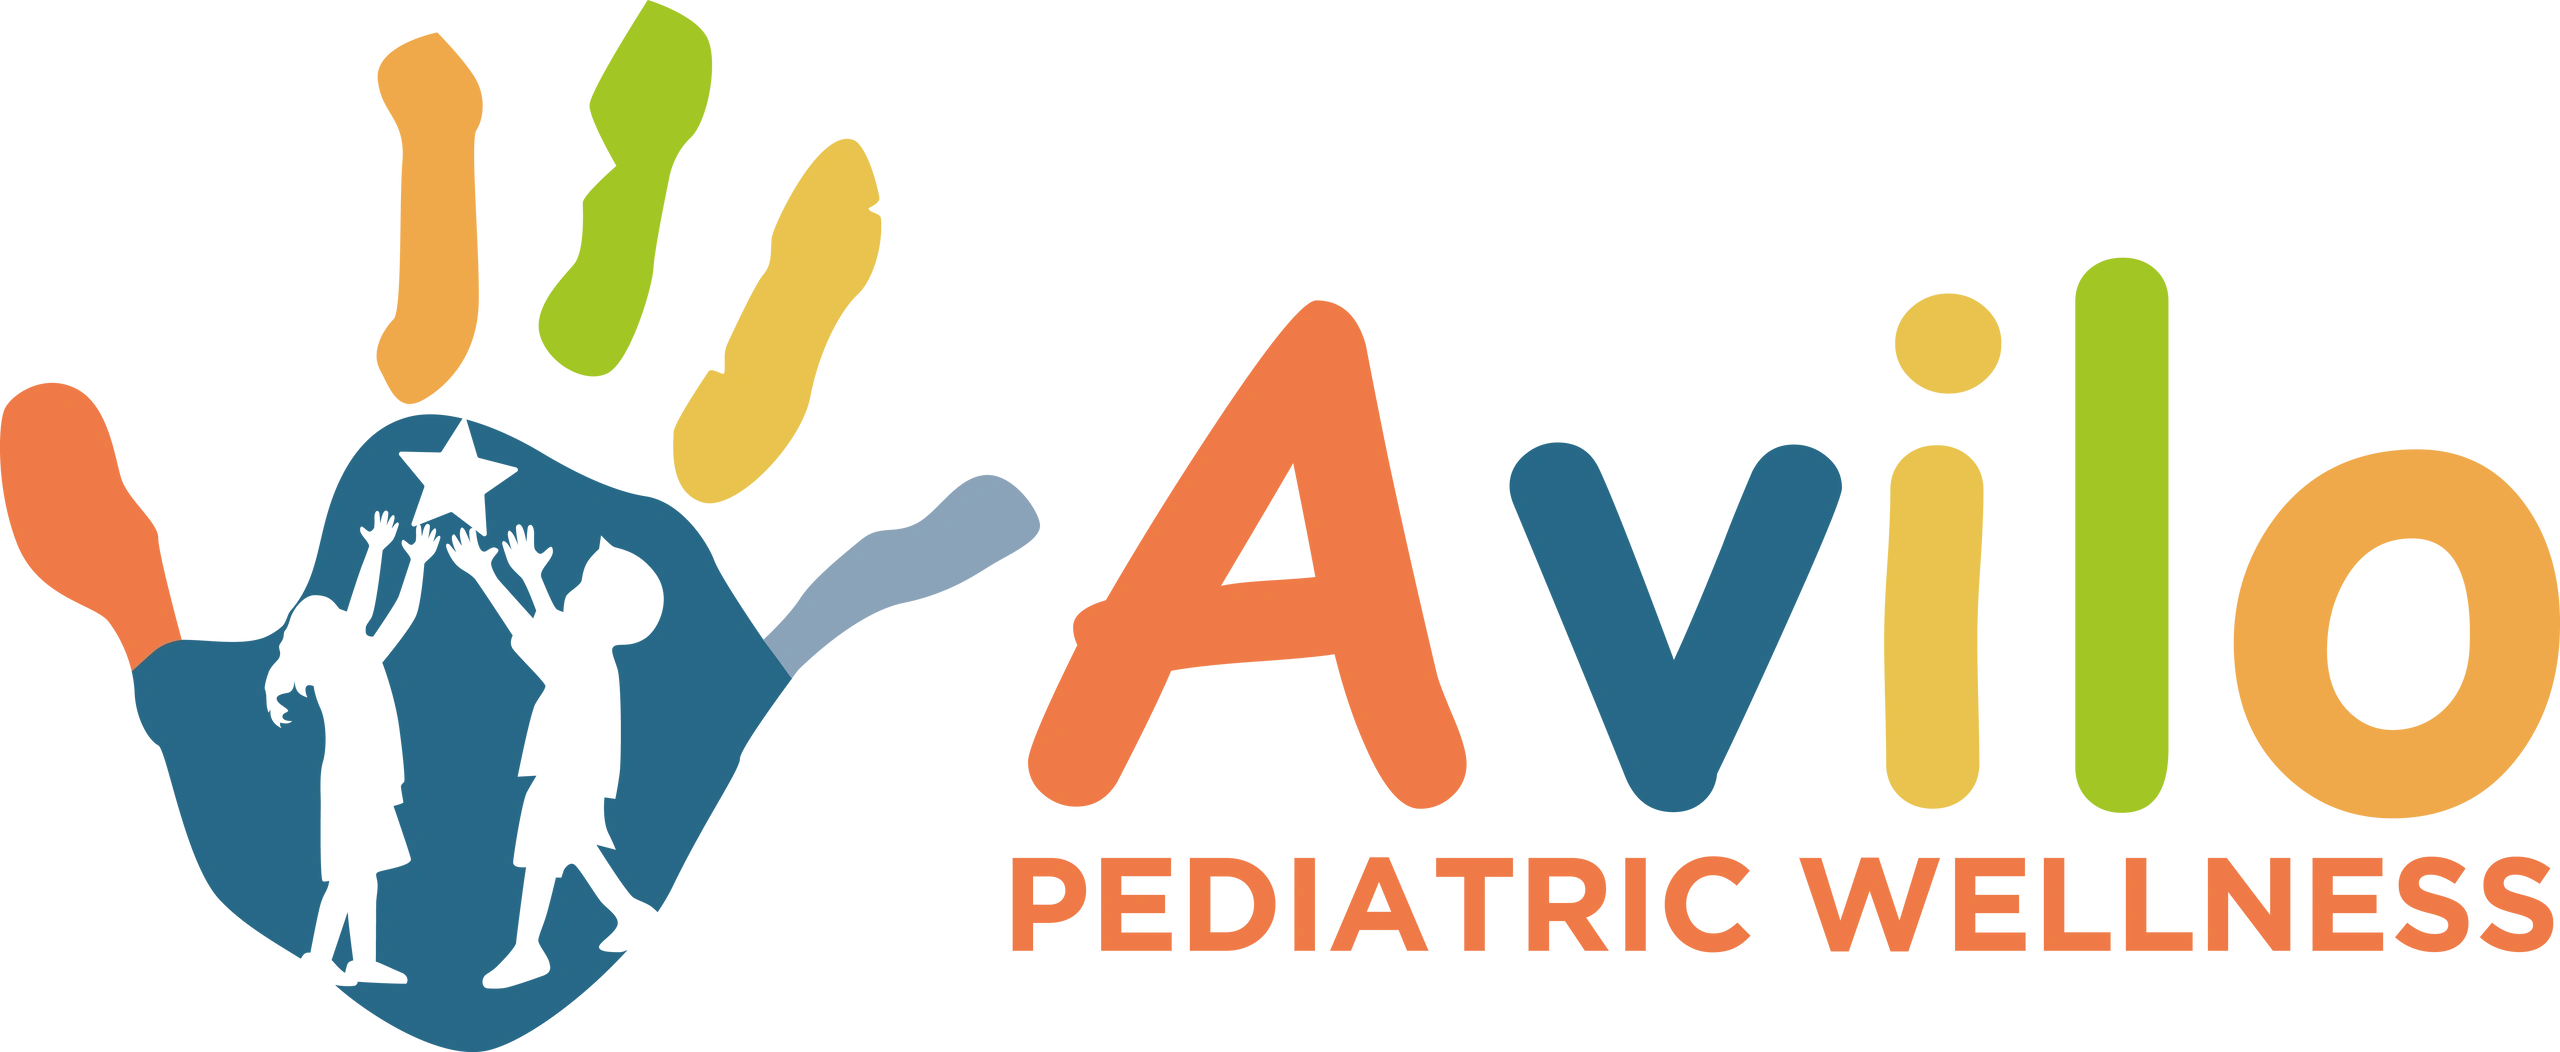 Occupational Therapy for Children - Avilo Pediatric Therapy